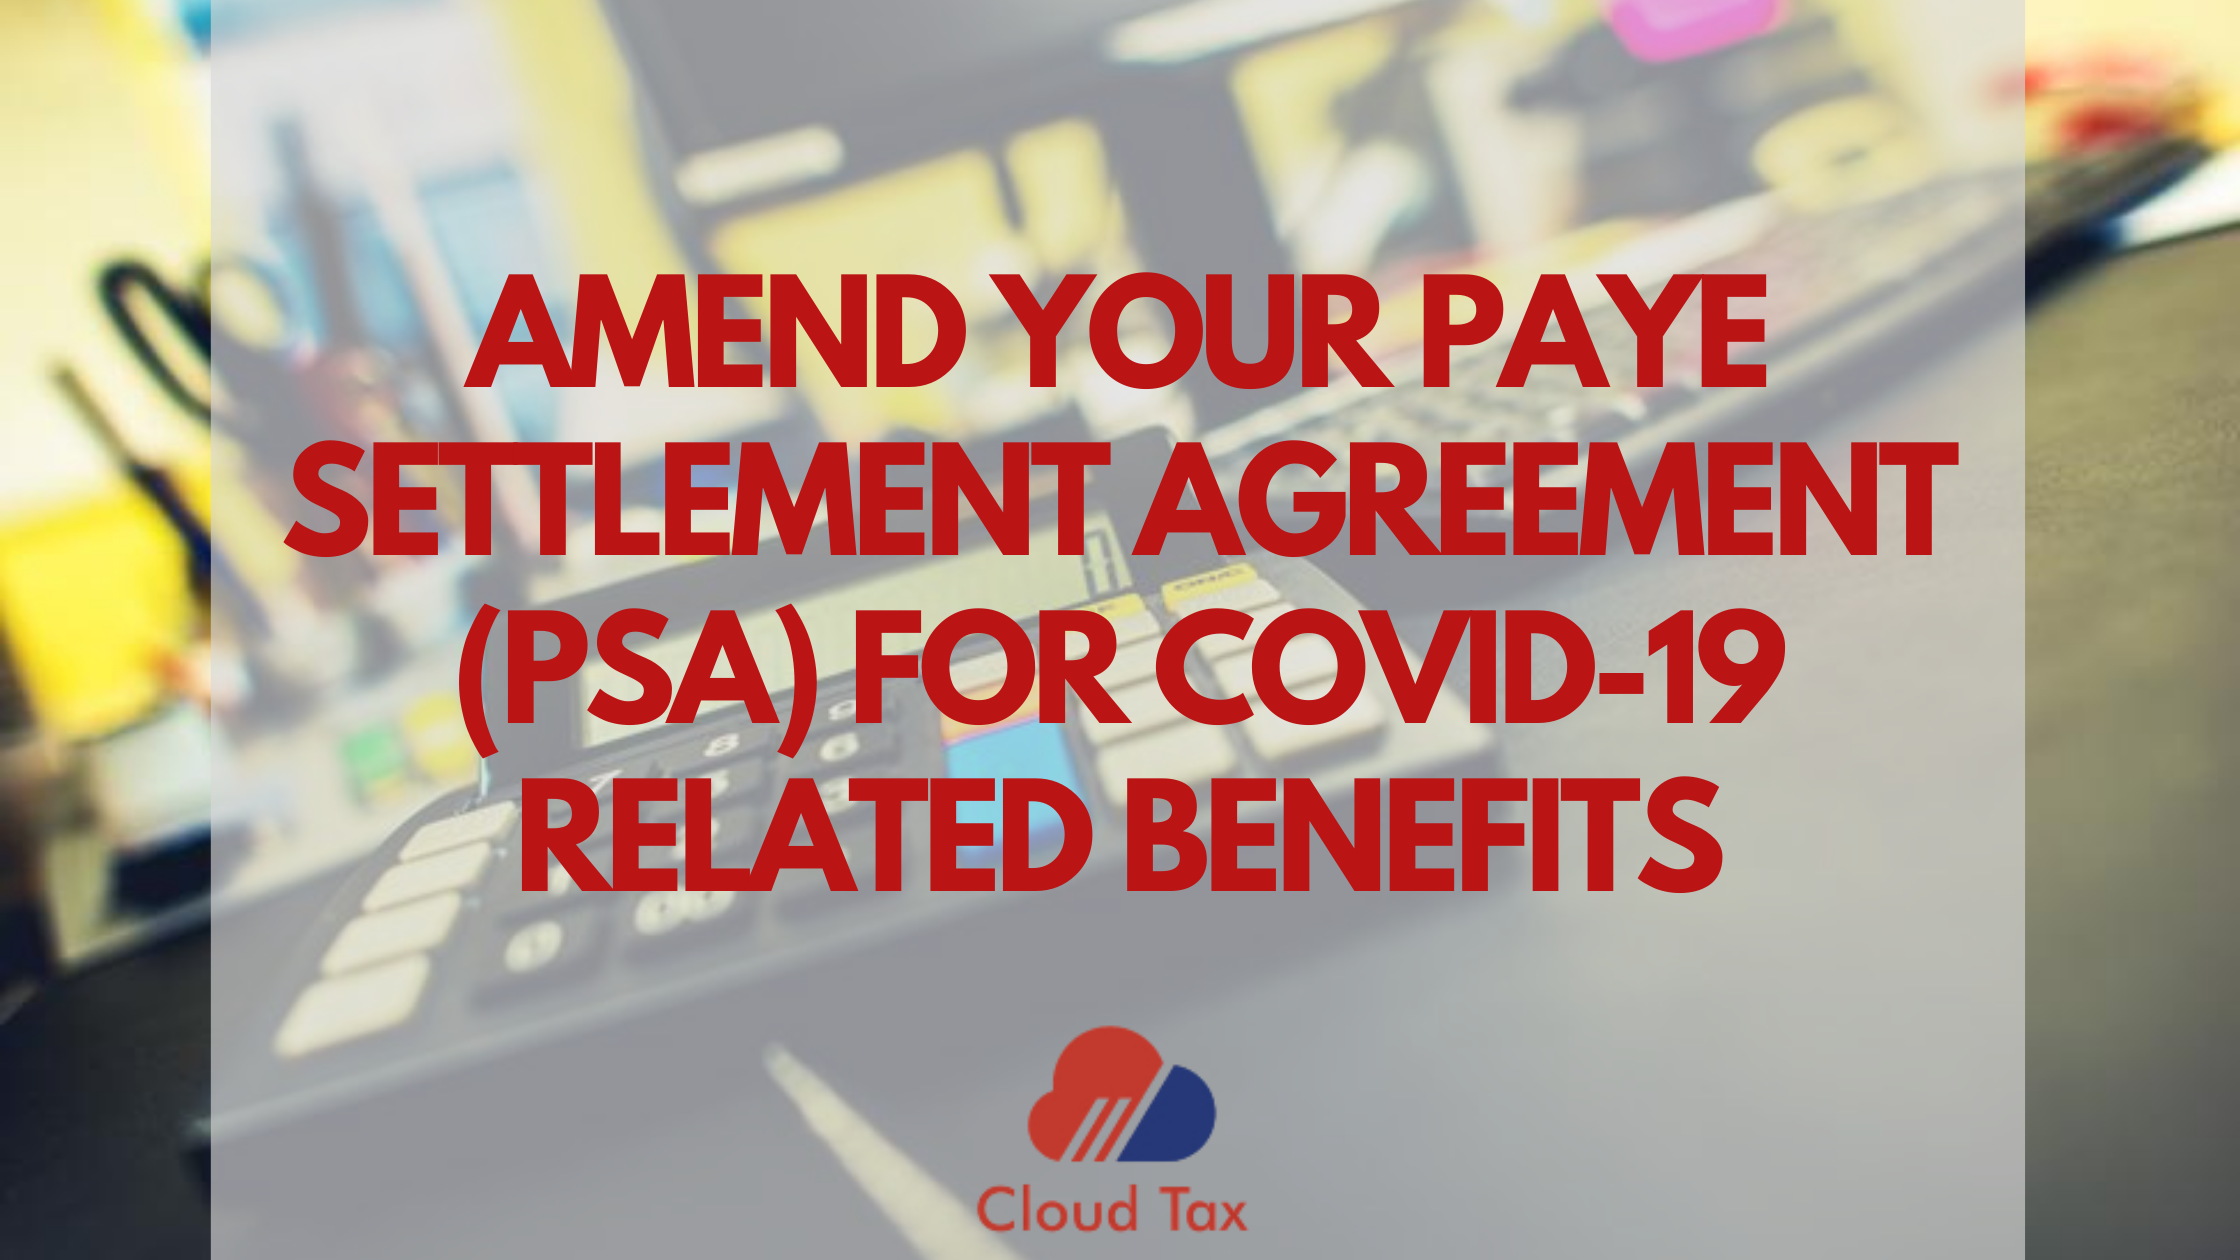 Amend your PAYE Settlement Agreement (PSA) for Covid-19 related benefits